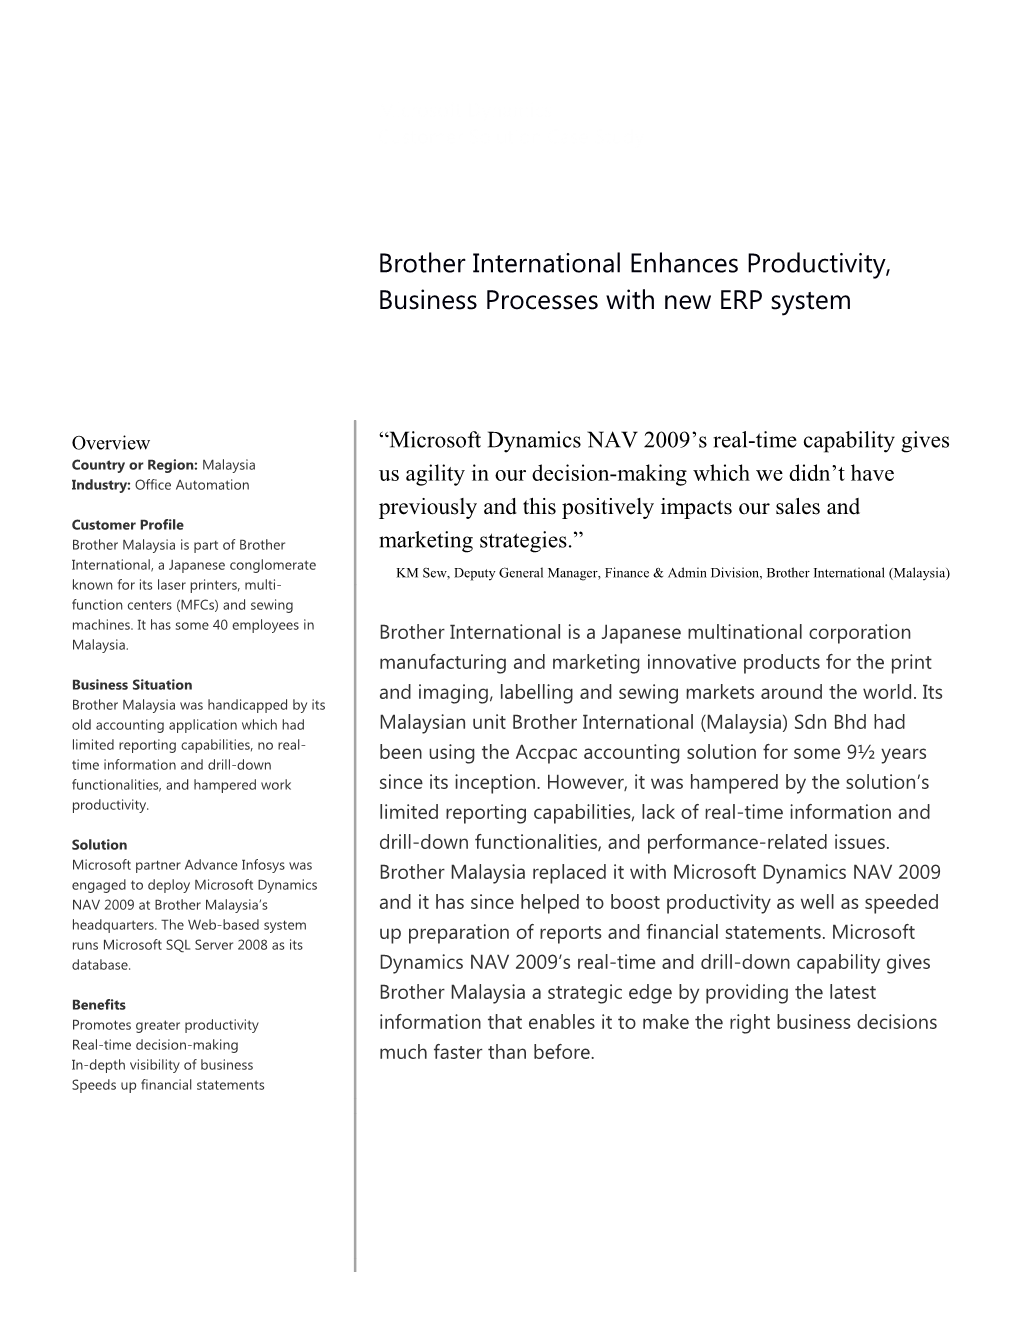 Metia CEP Brother International Enhances Productivity, Business Processes with New ERP System